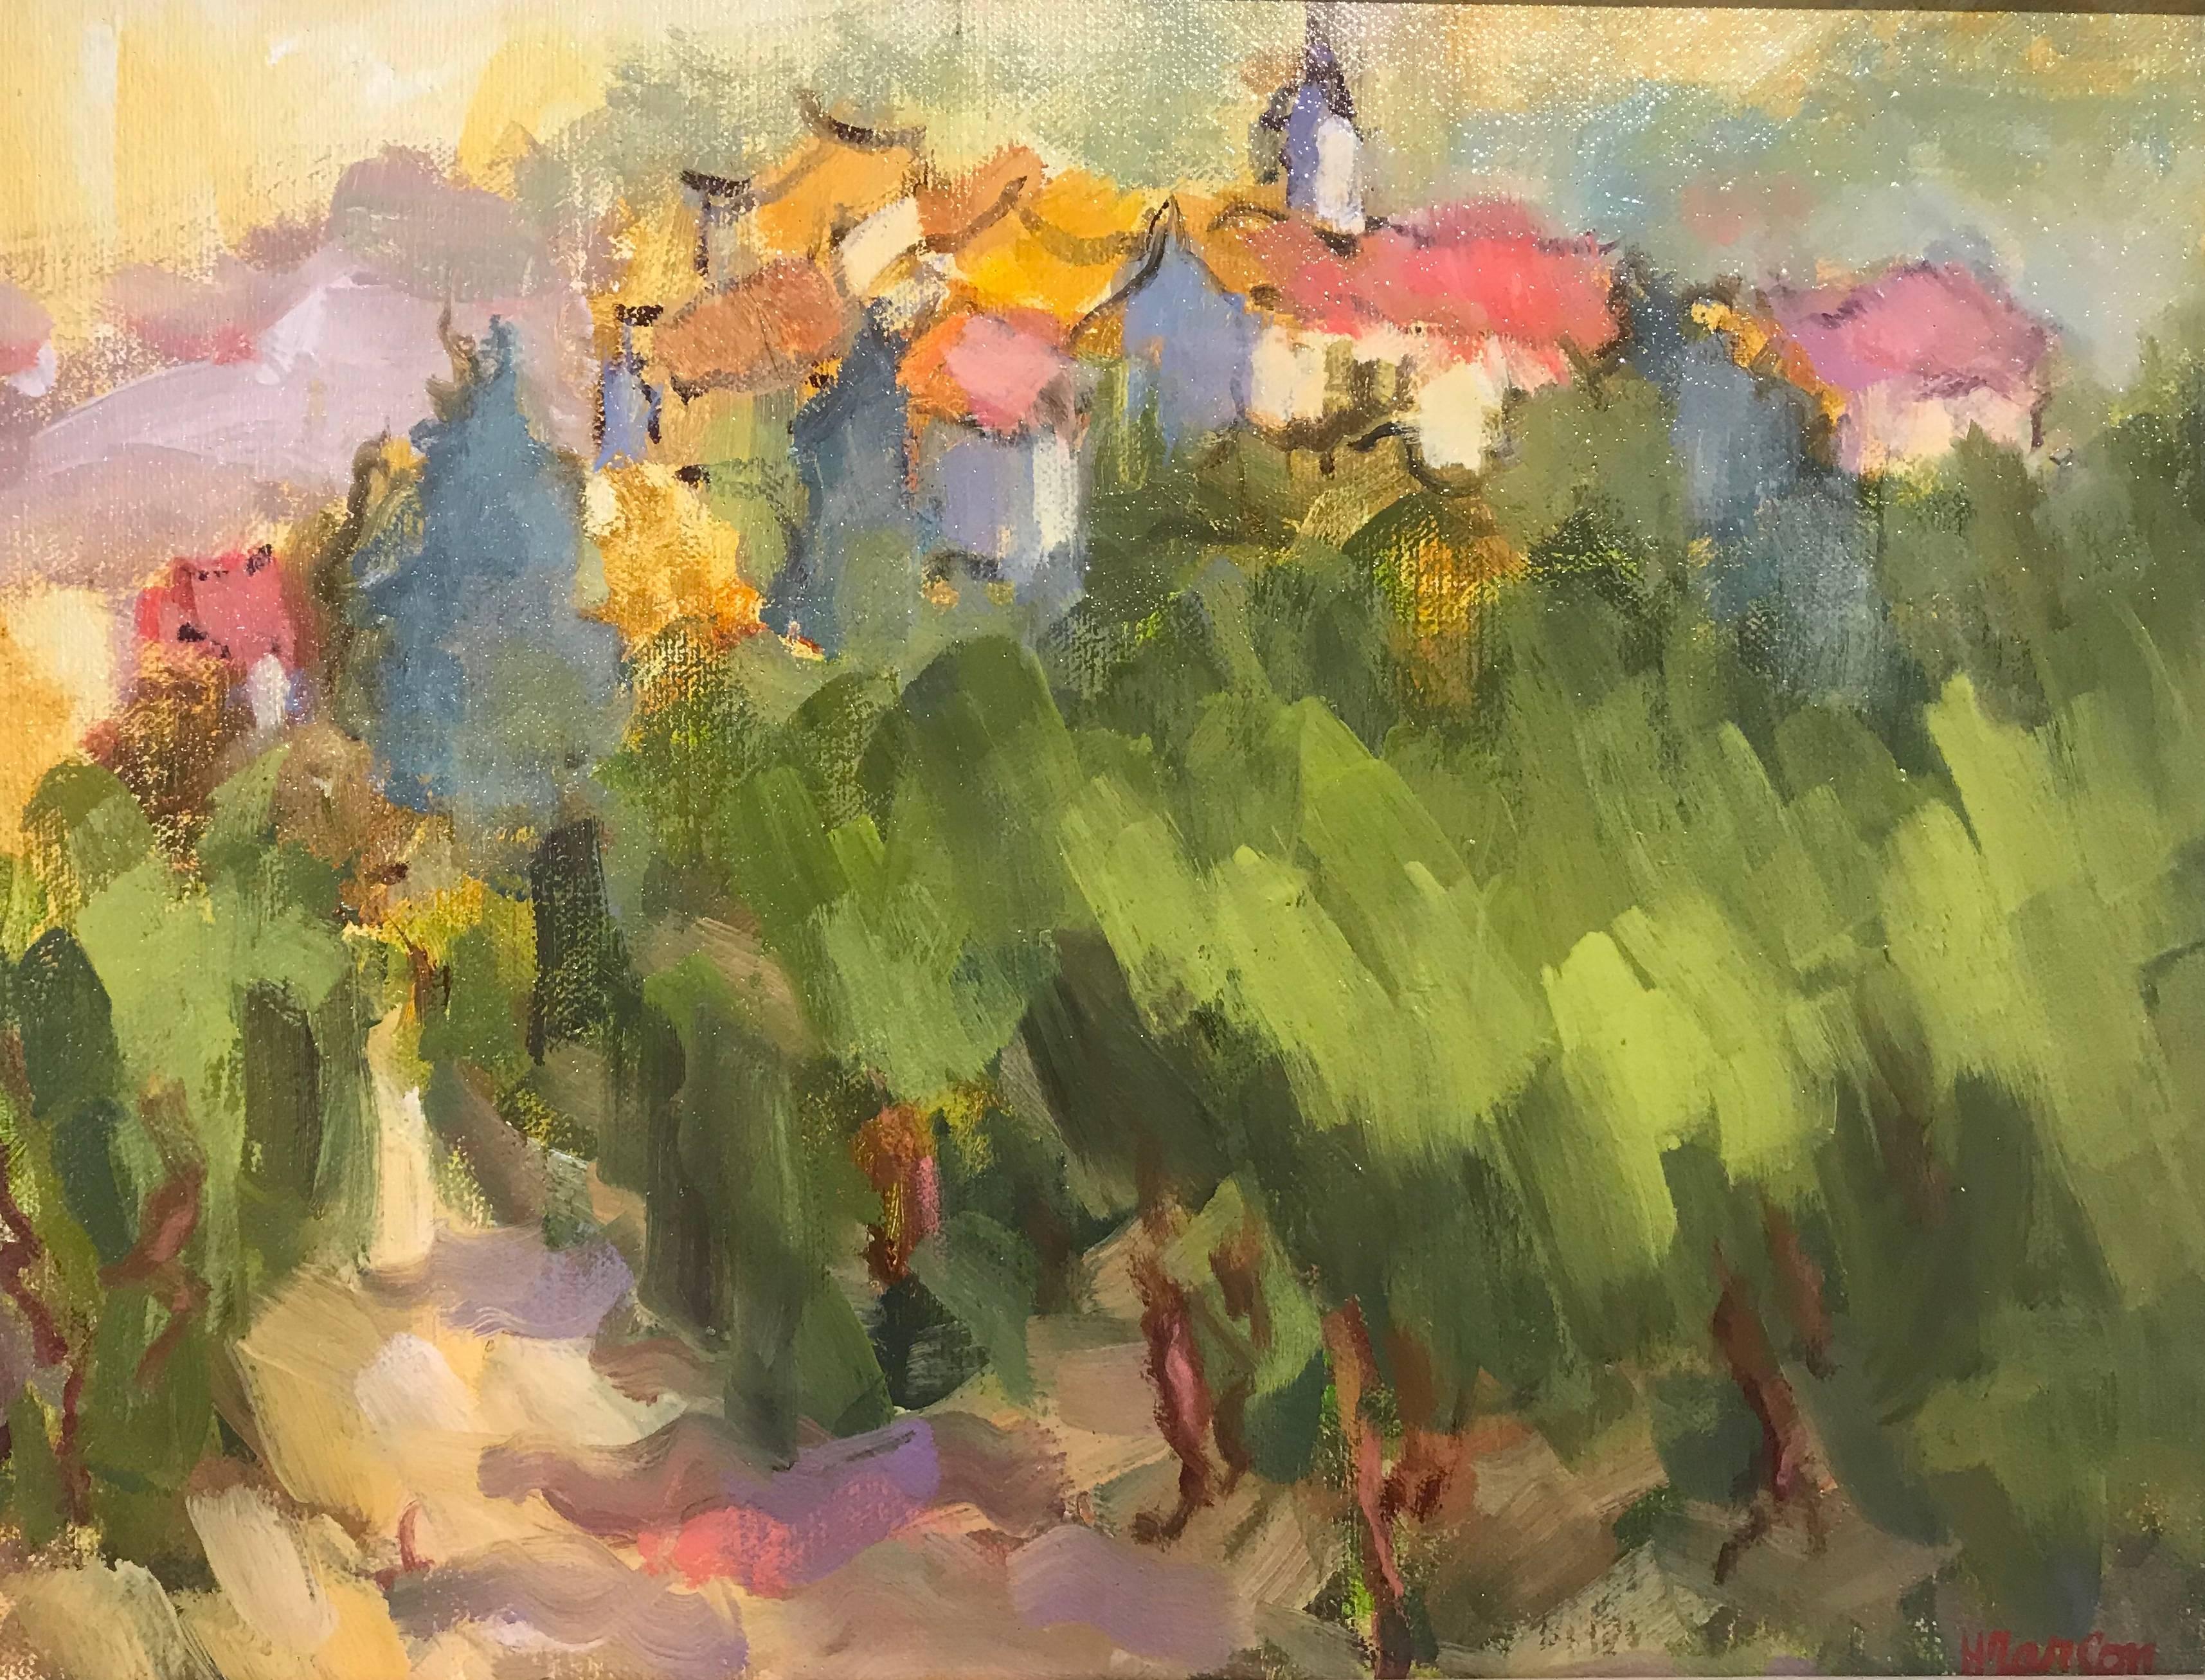 'Village du Vignoble' is a petite Impressionist French Provençal landscape painting created by artist Helen Farson in 2018. Featuring a palette made of bright colors such as green, pink and orange tones, the painting depicts in a manner leaning